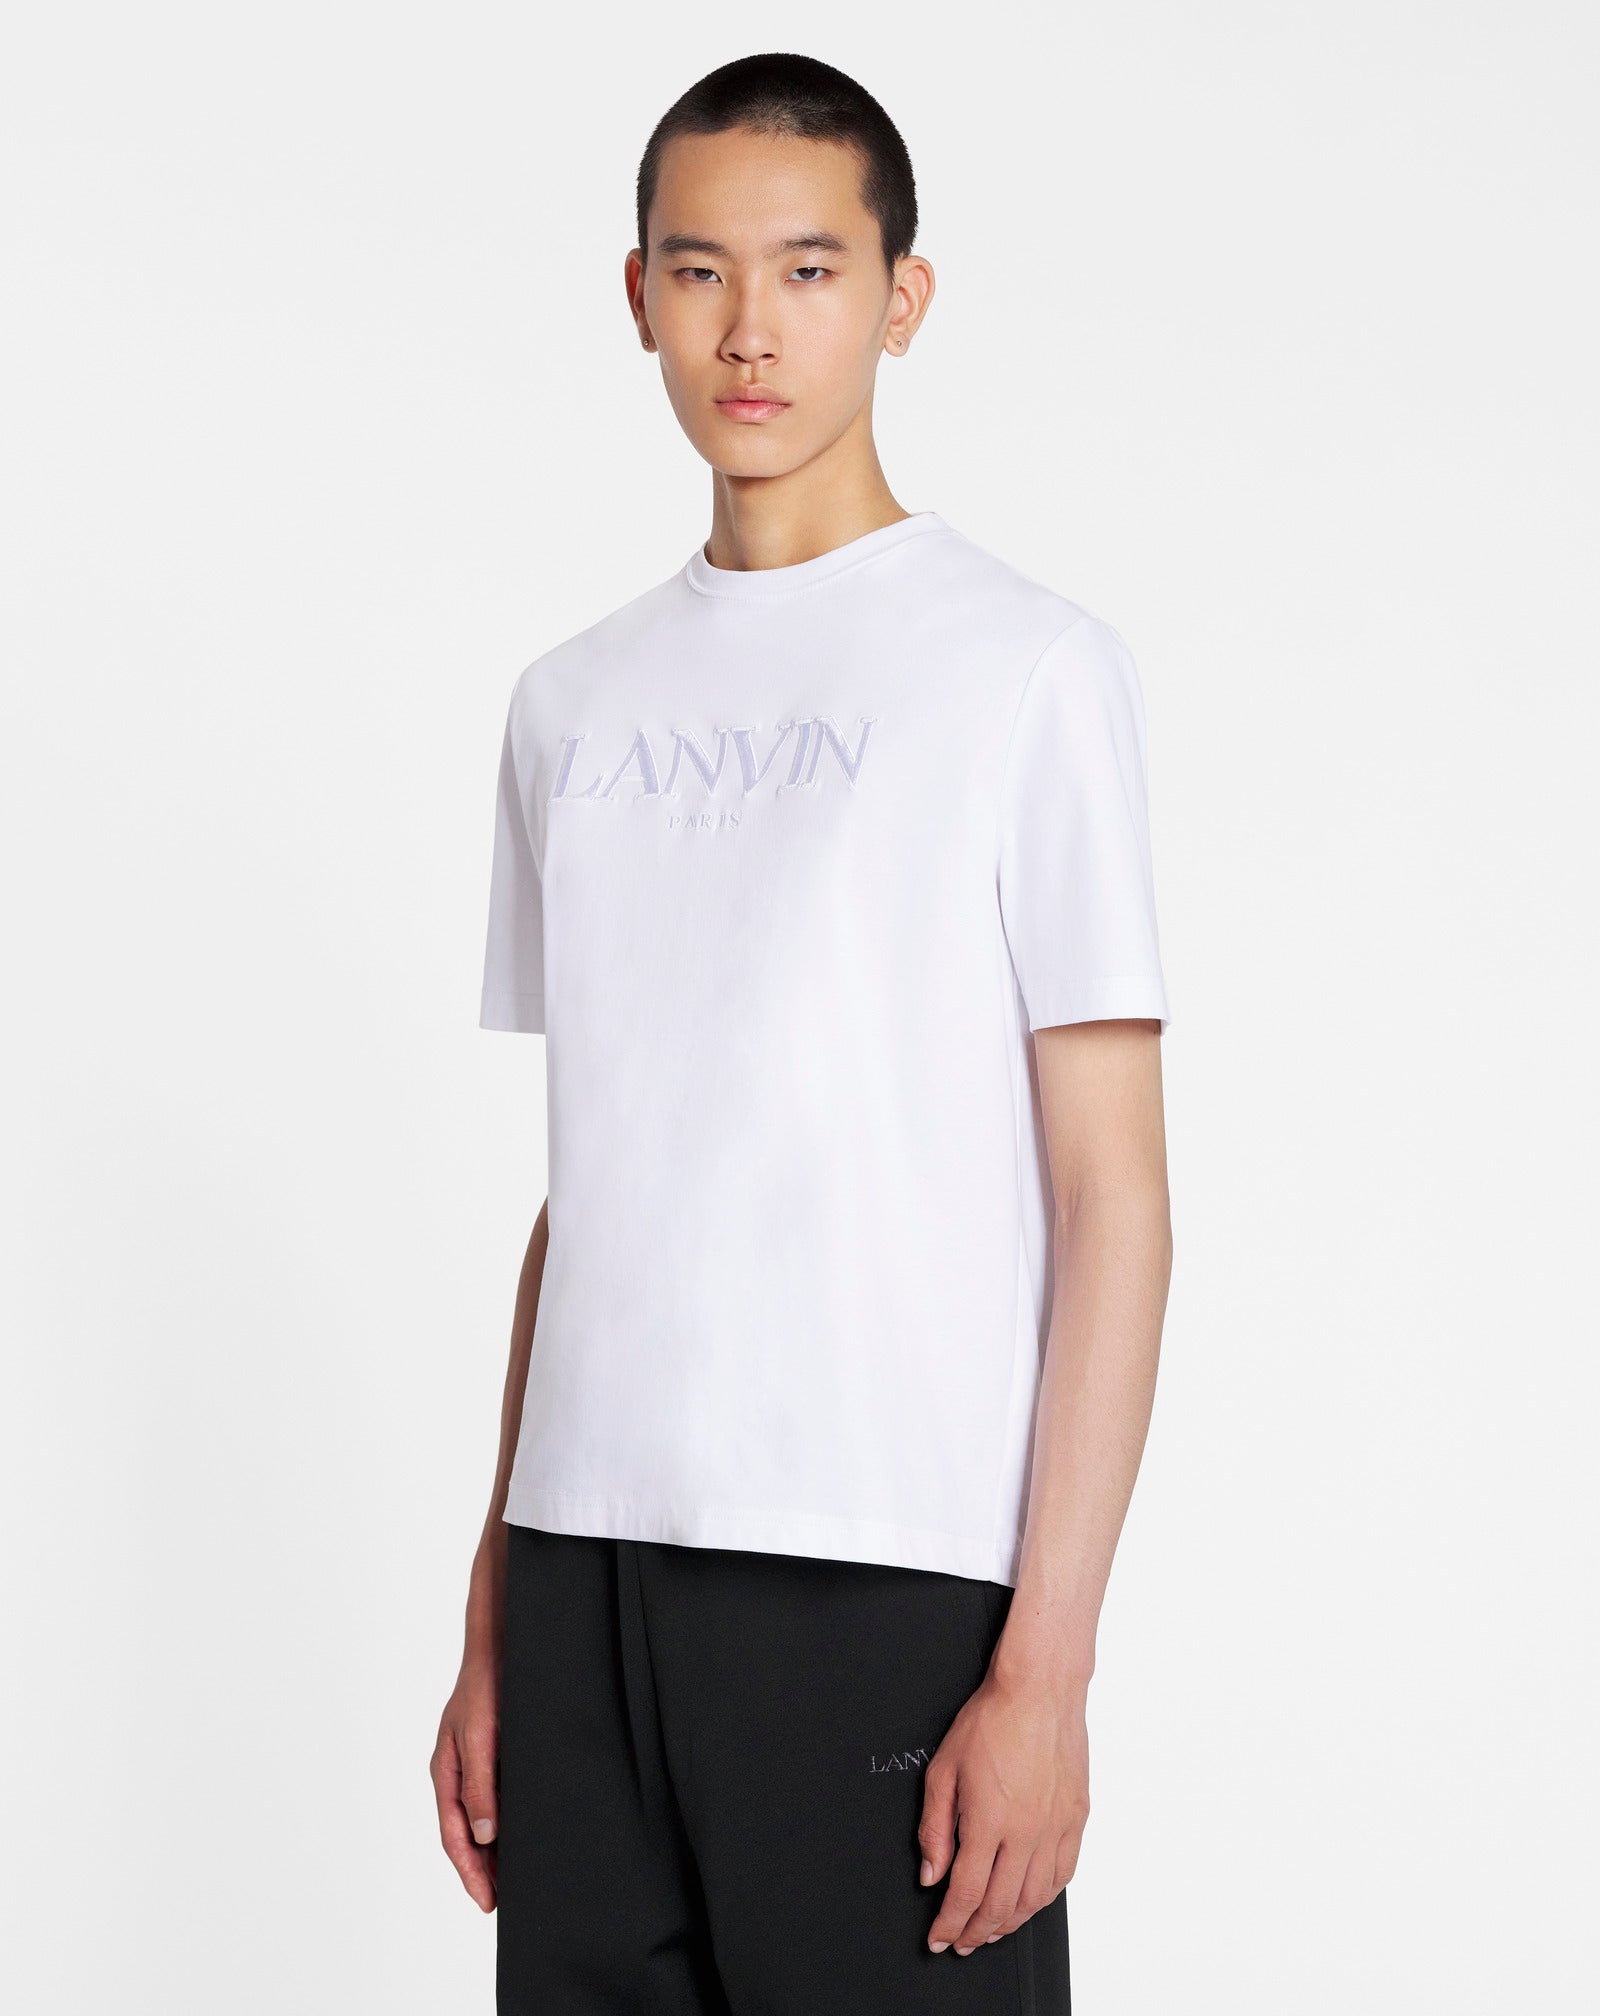 Lanvin embroidered t-shirt